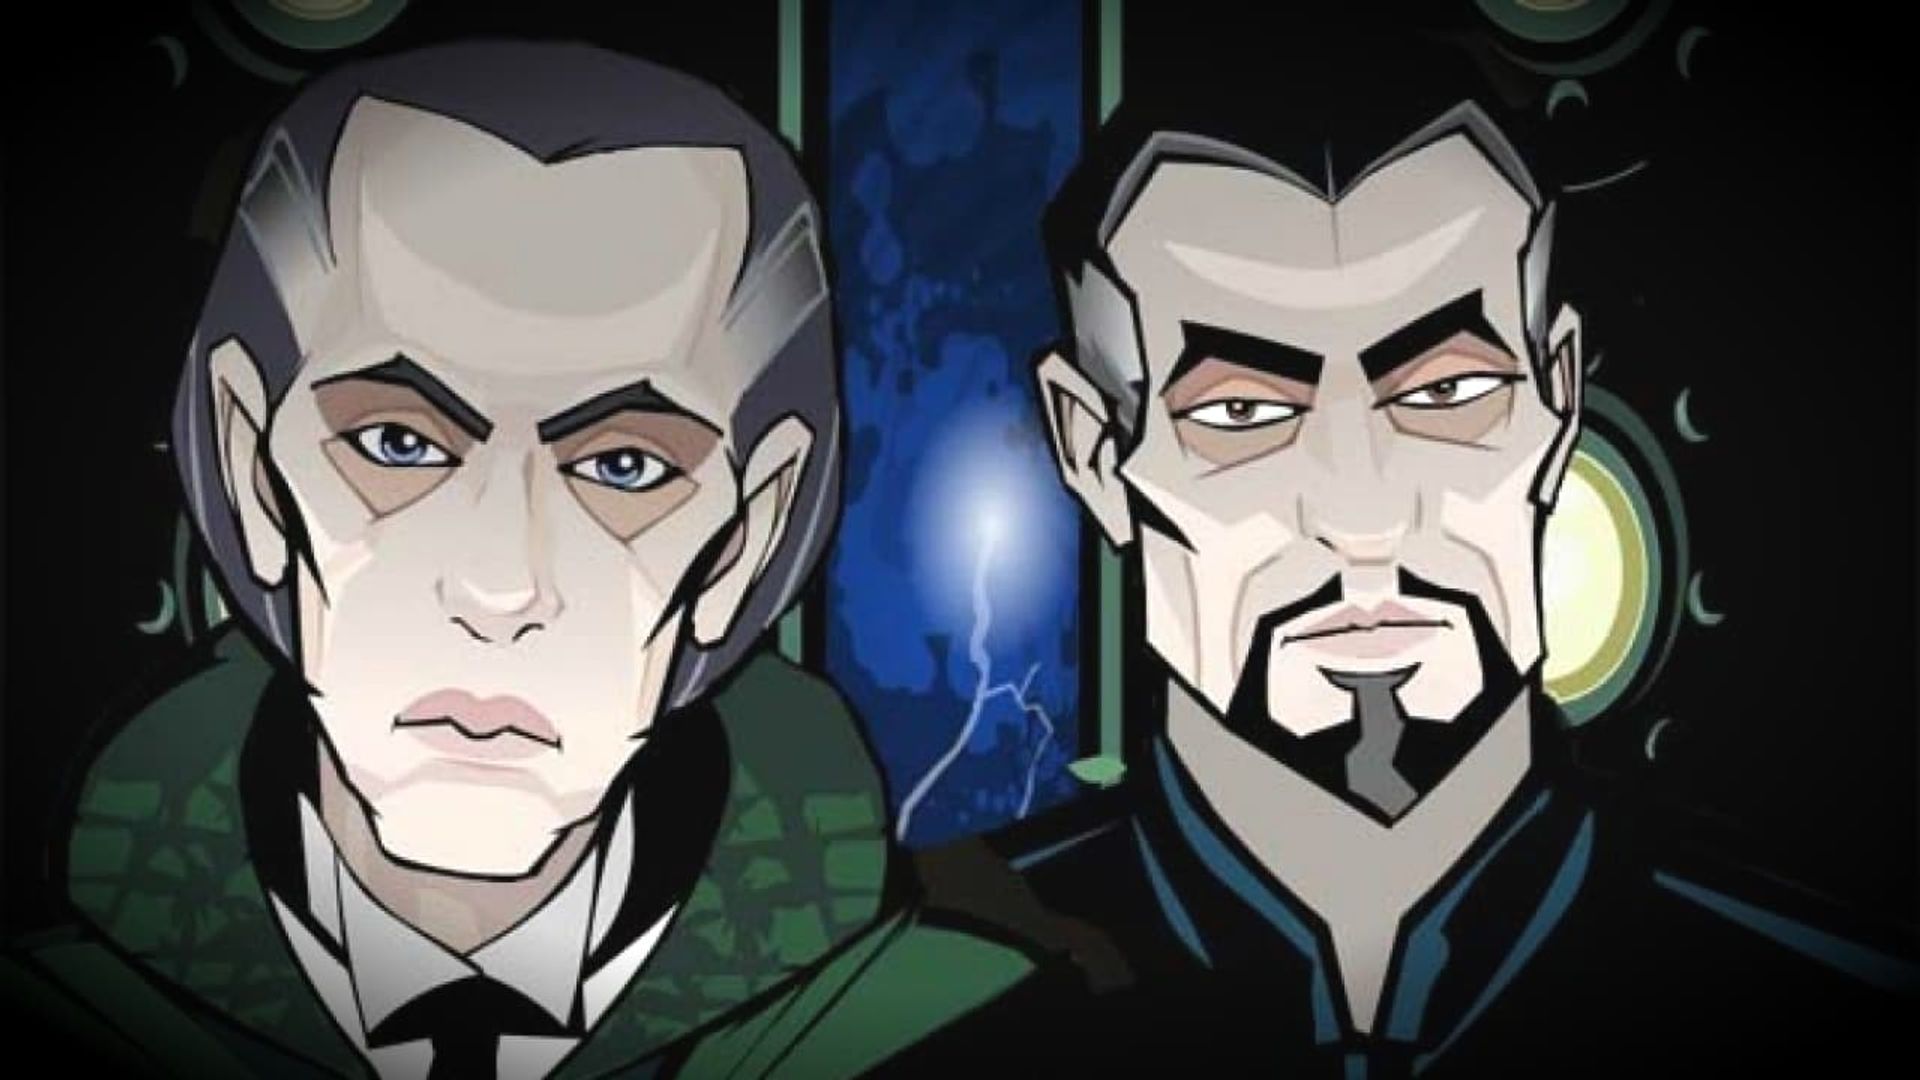 Doctor Who: Scream of the Shalka background